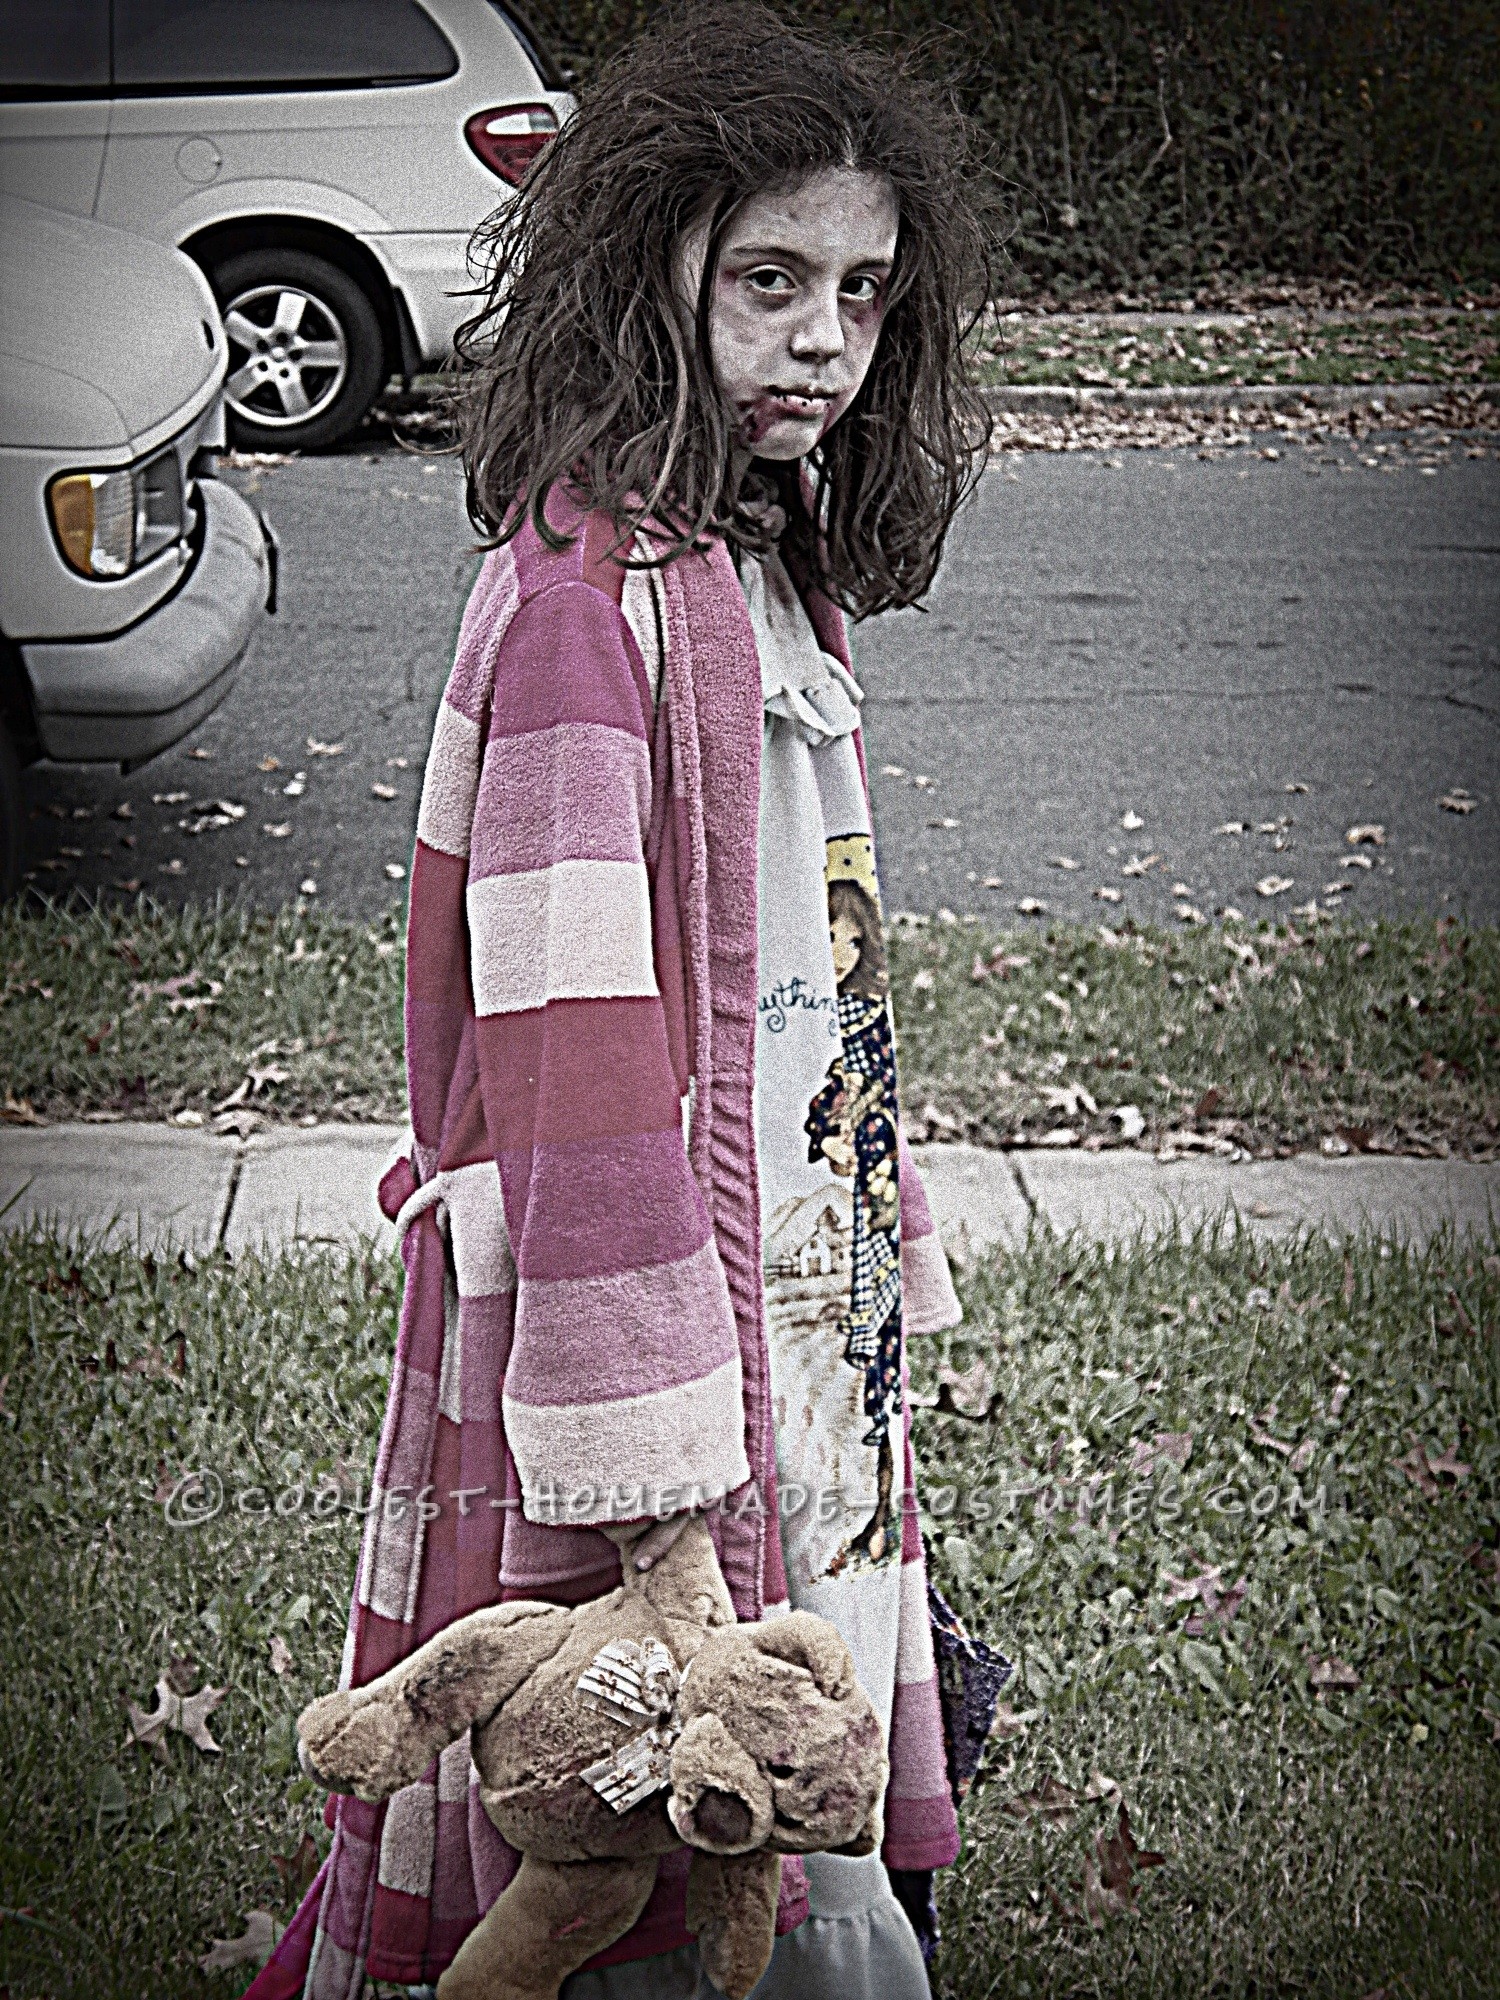 how to make a homemade zombie costume for girls